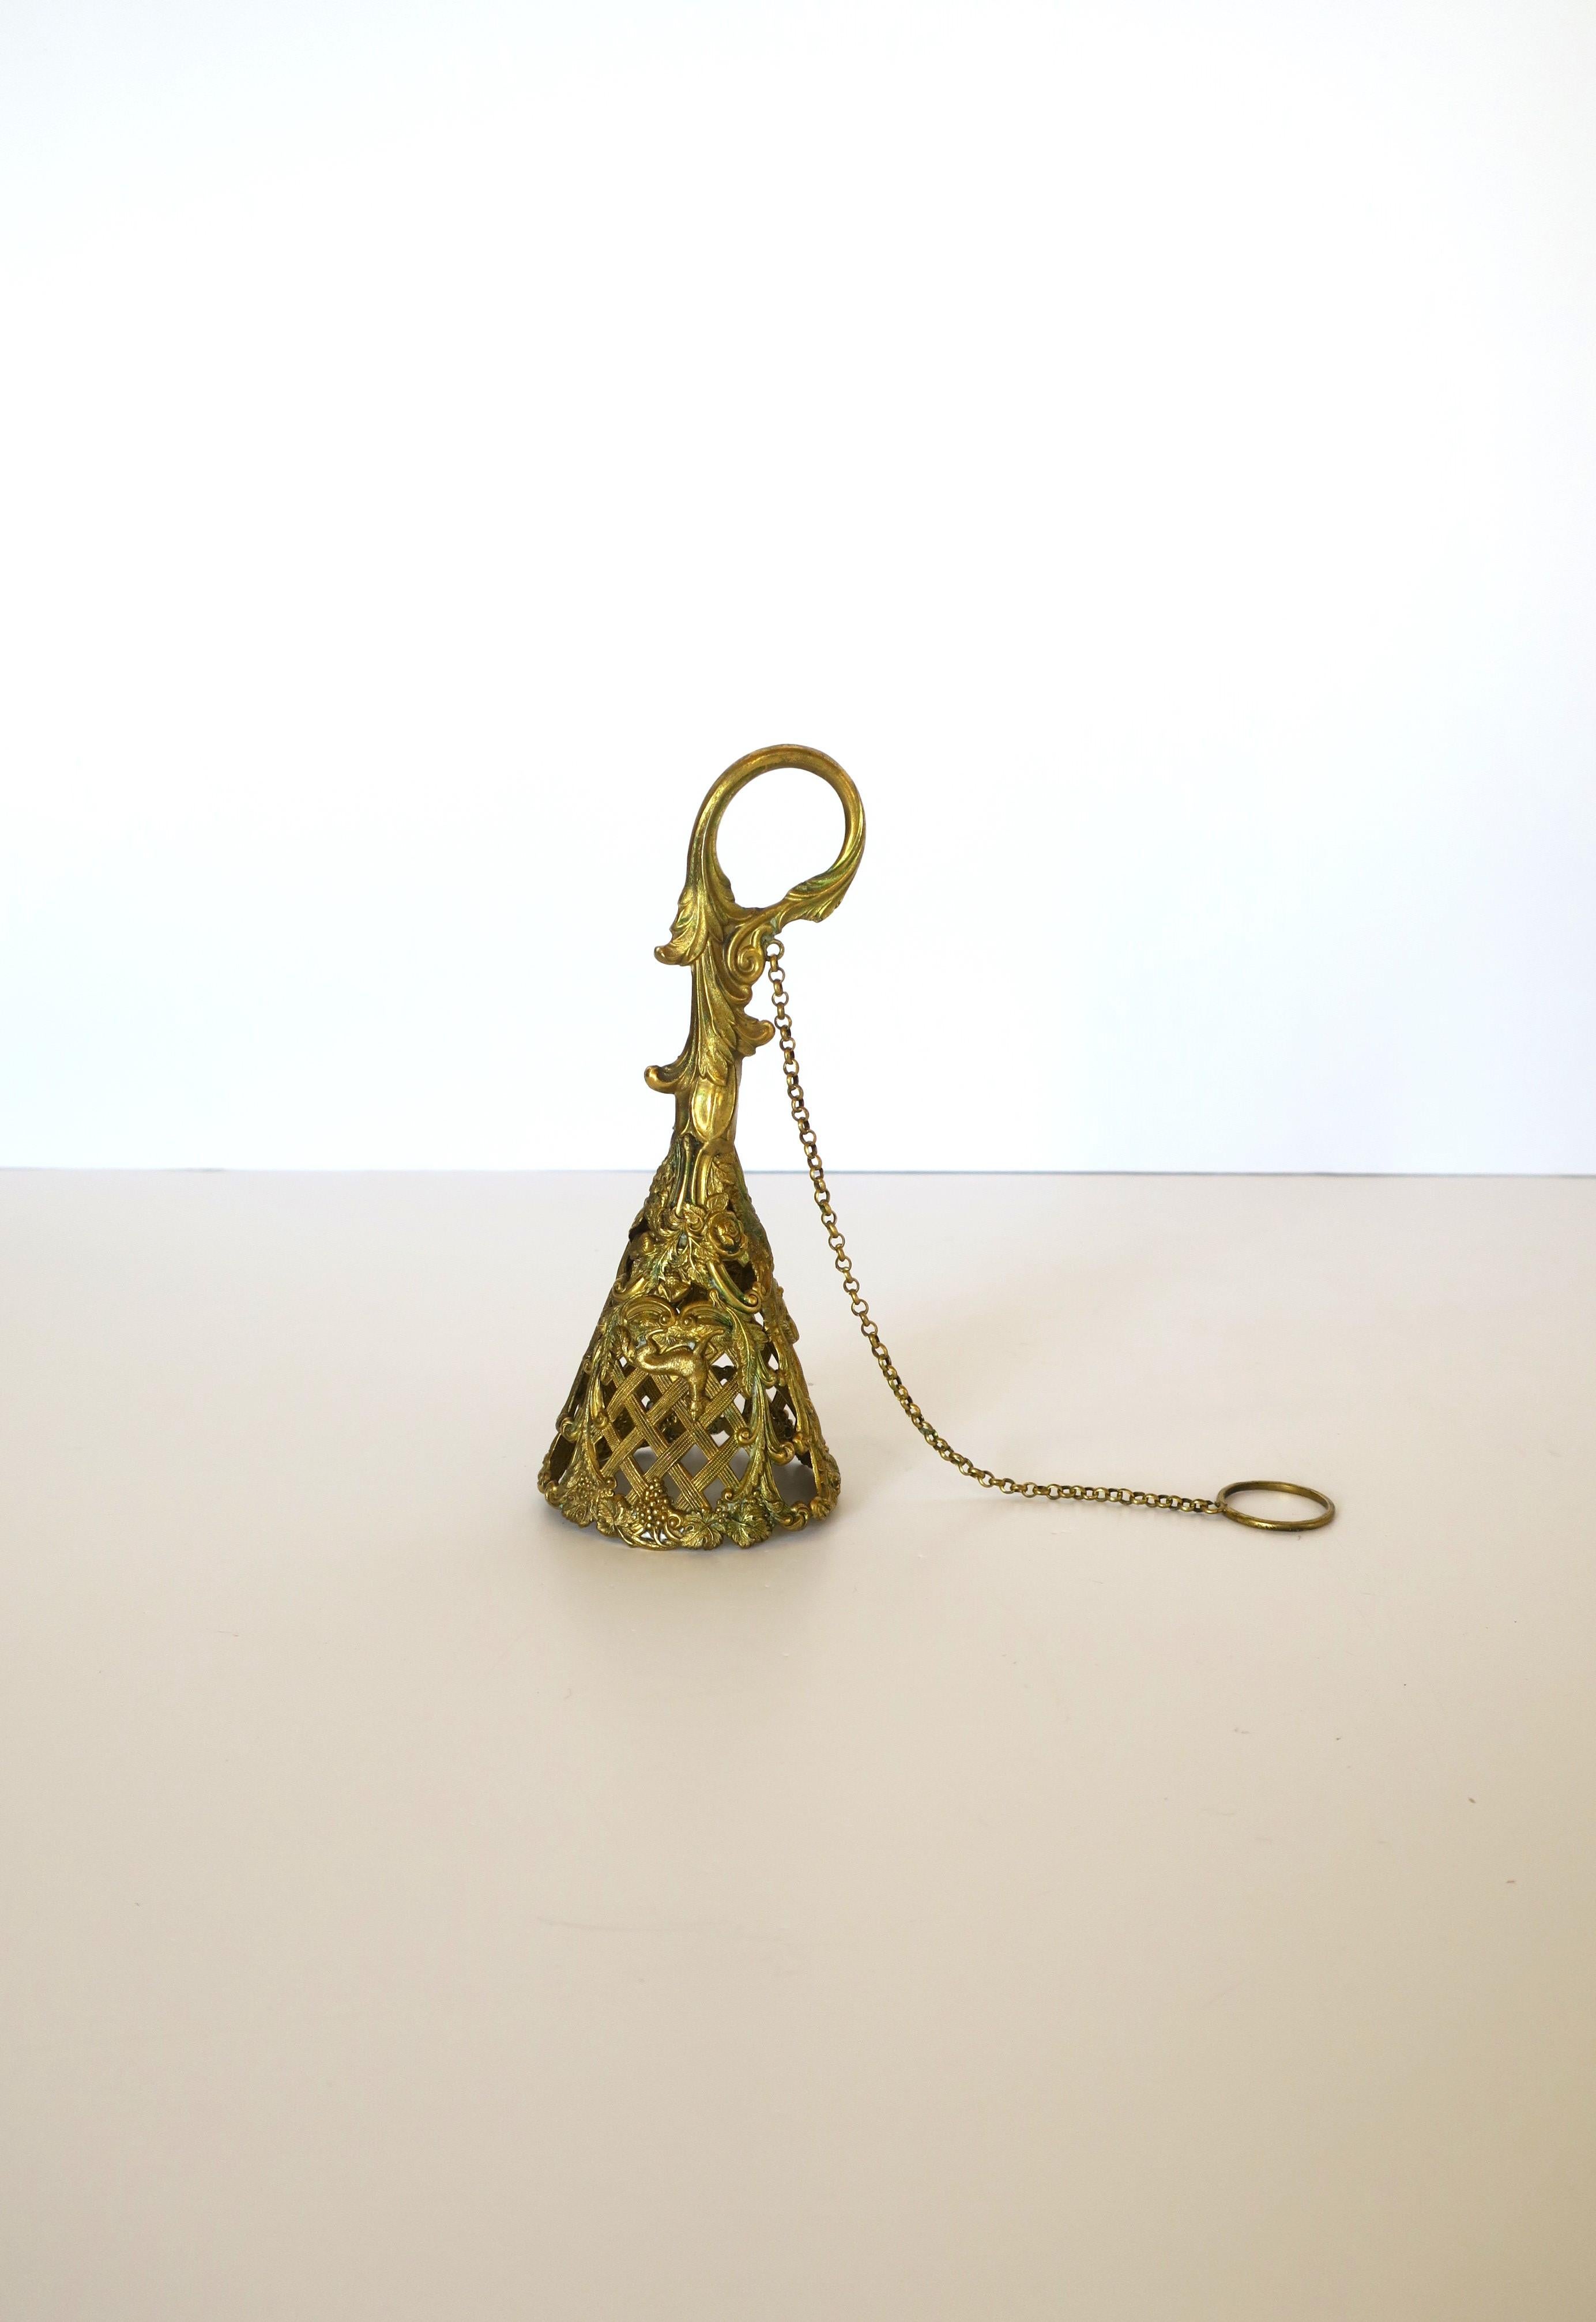 1840 candle snuffer